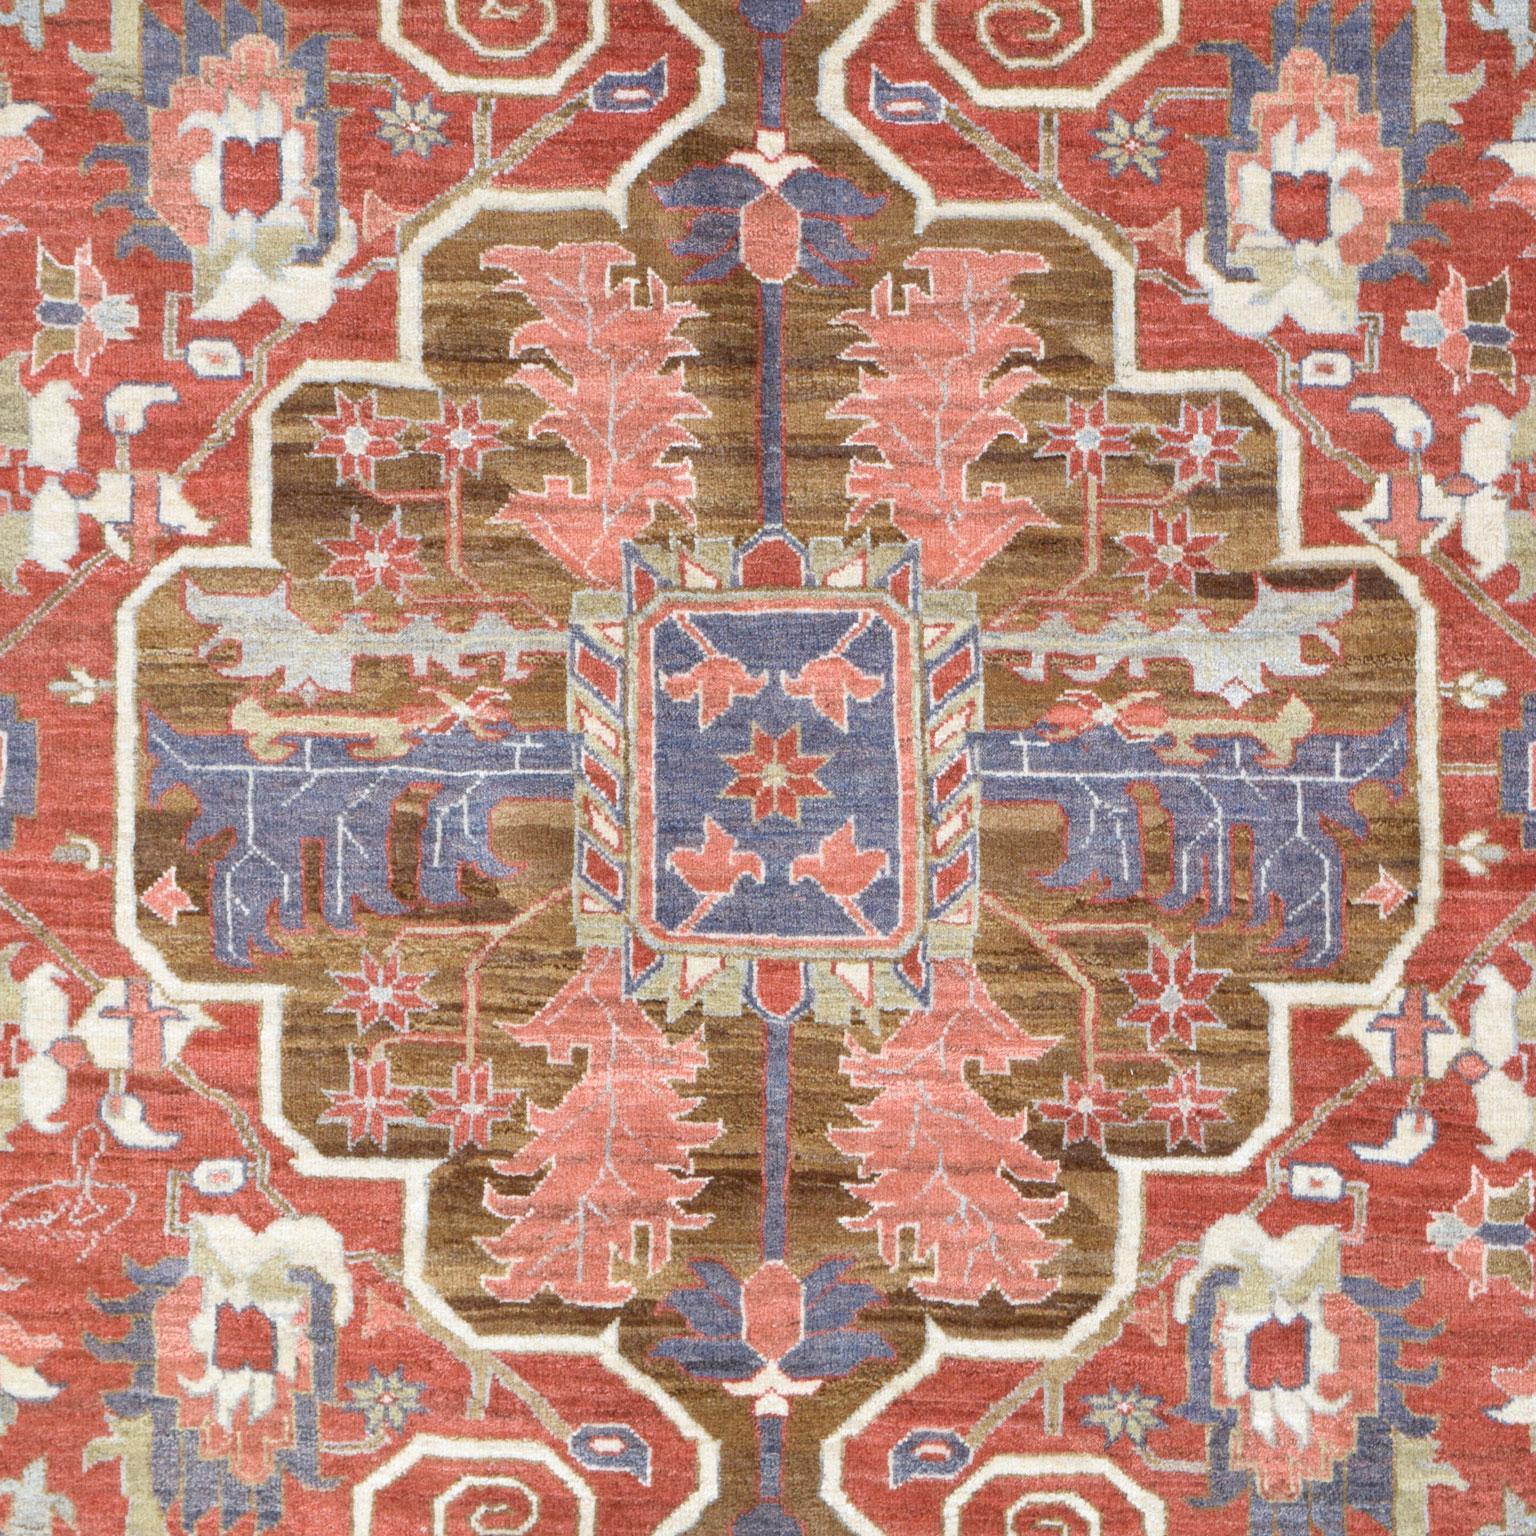 Detailed by organically dyed shades of red, purple, pink, light green, and brown wool, this hand-knotted Heriz carpet measures 8’5” x 10’10” and belongs to the Orley Shabahang Traditional Collection. The carpet’s composition illustrates a